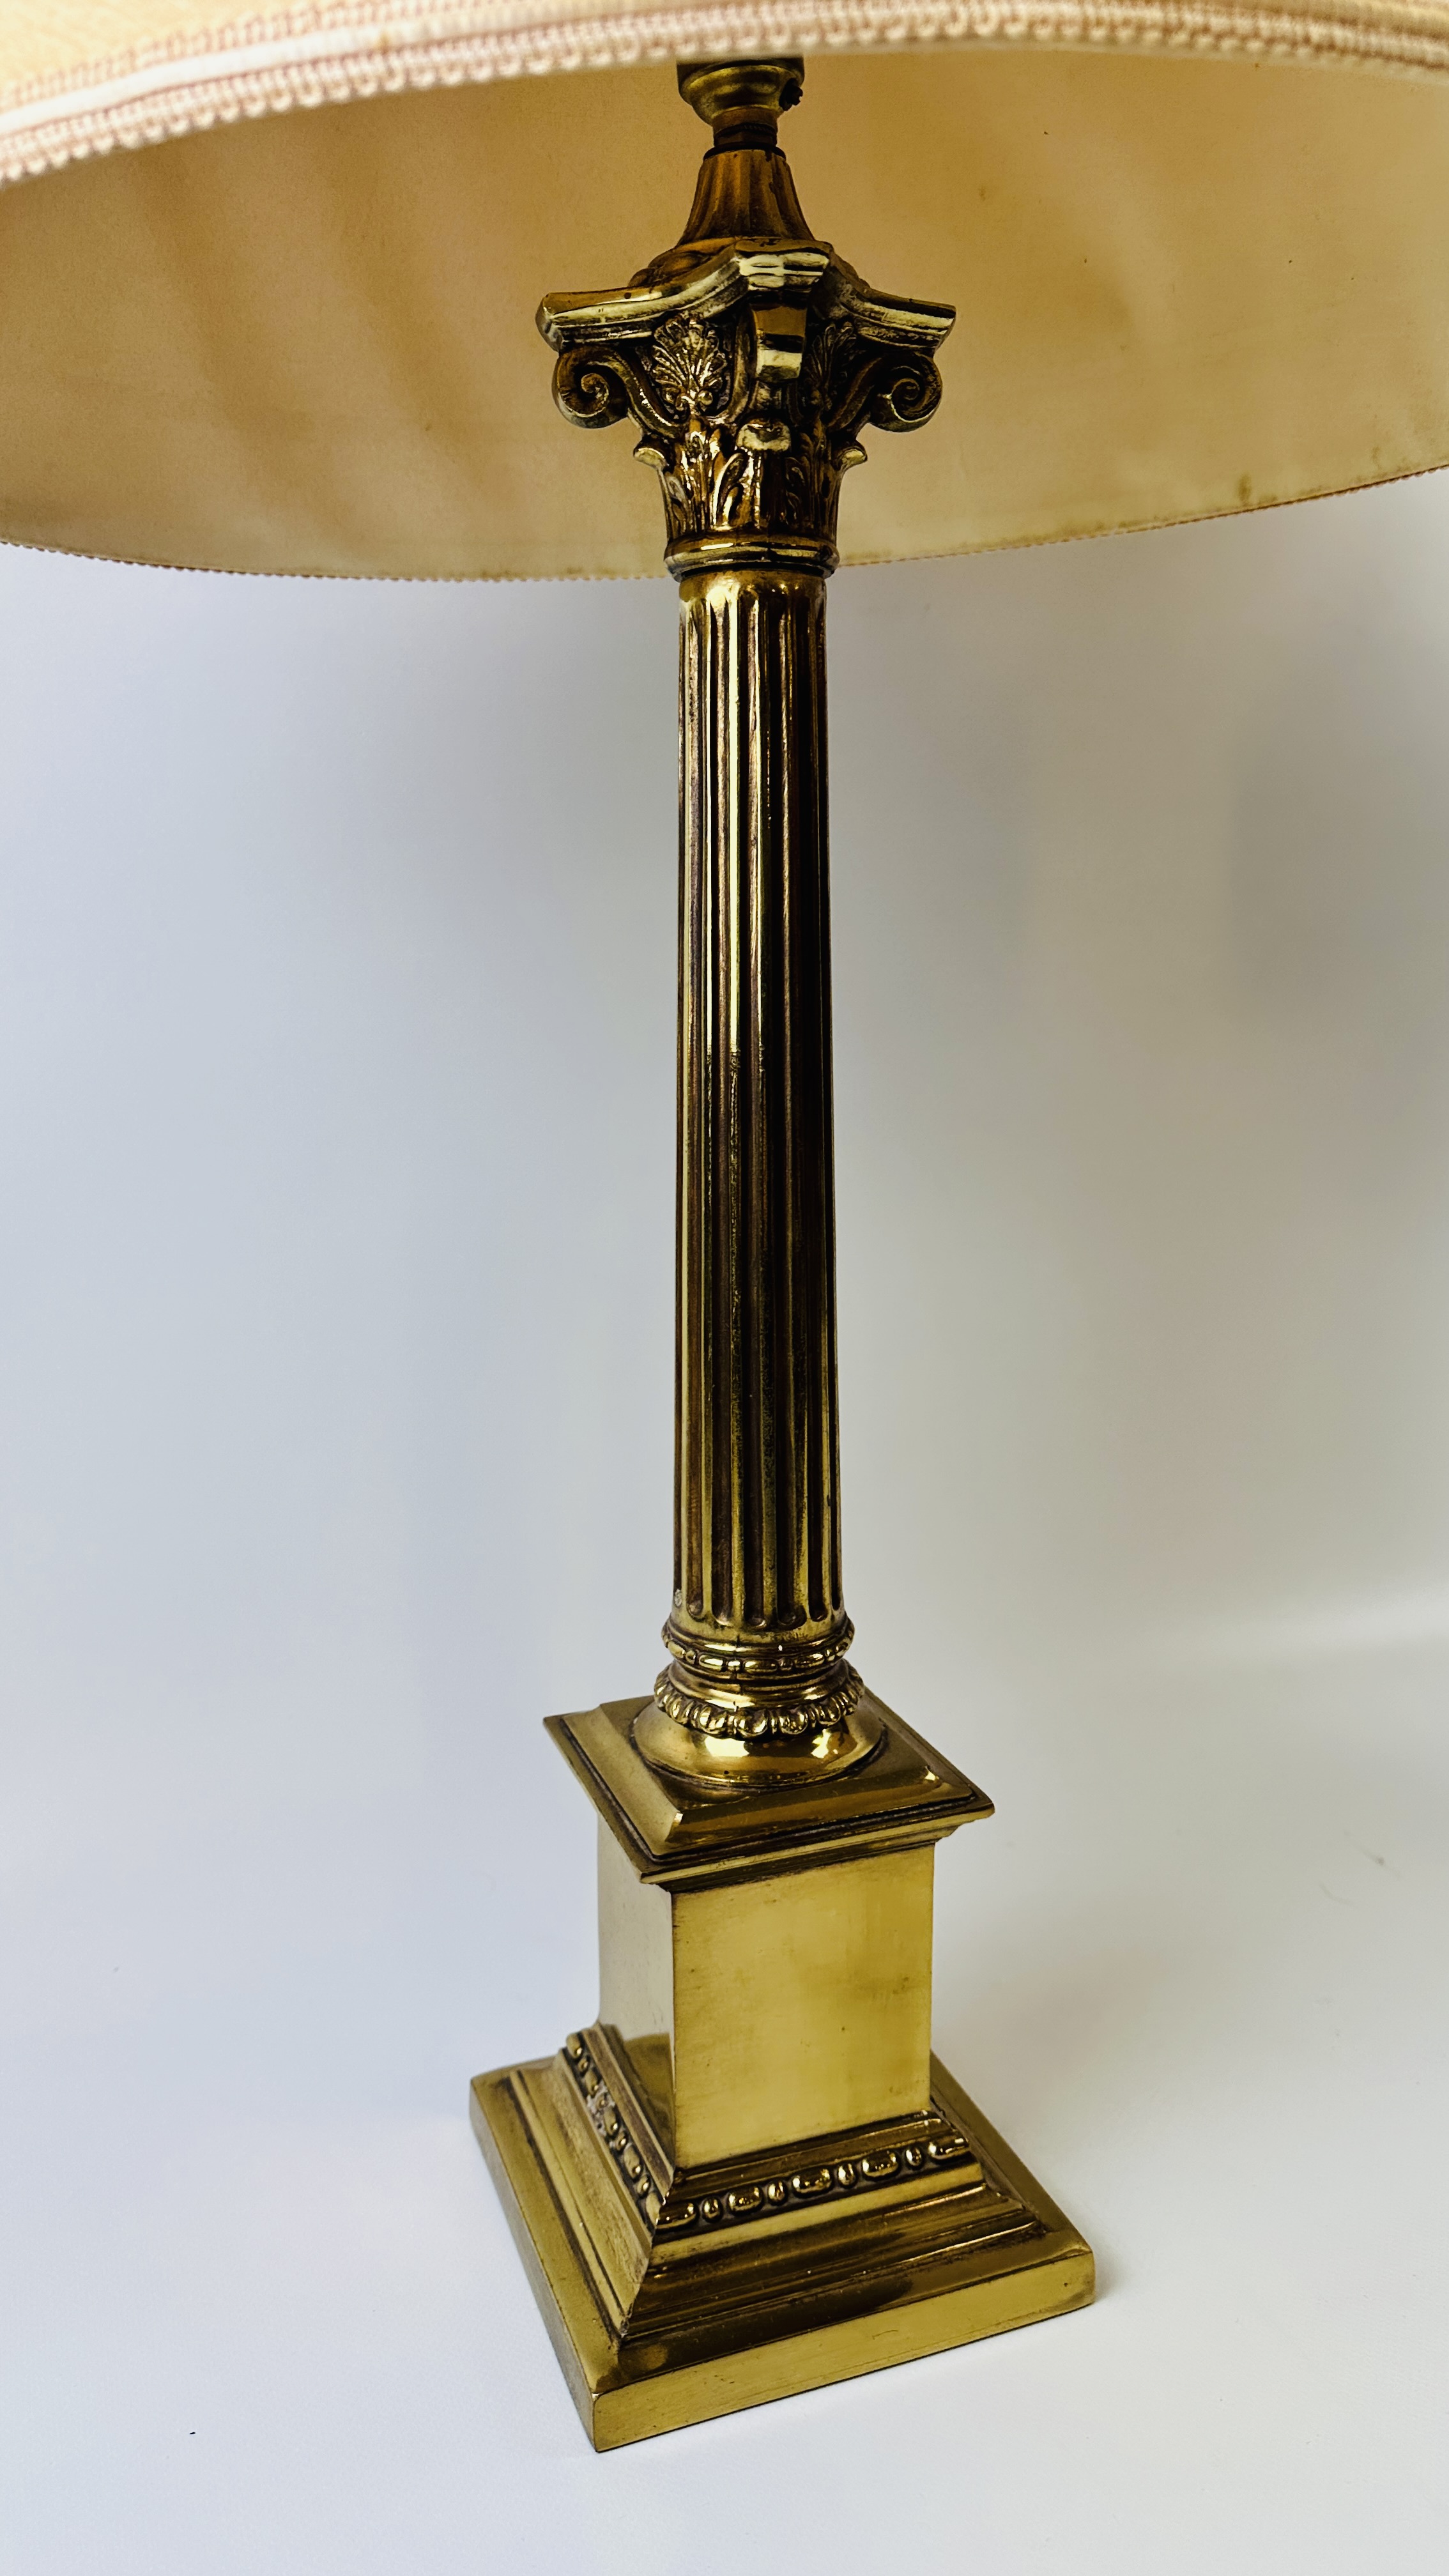 A PAIR OF HEAVY GILT FINISHED COLUMNED TABLE LAMPS - WIRES REMOVED. - Image 8 of 8